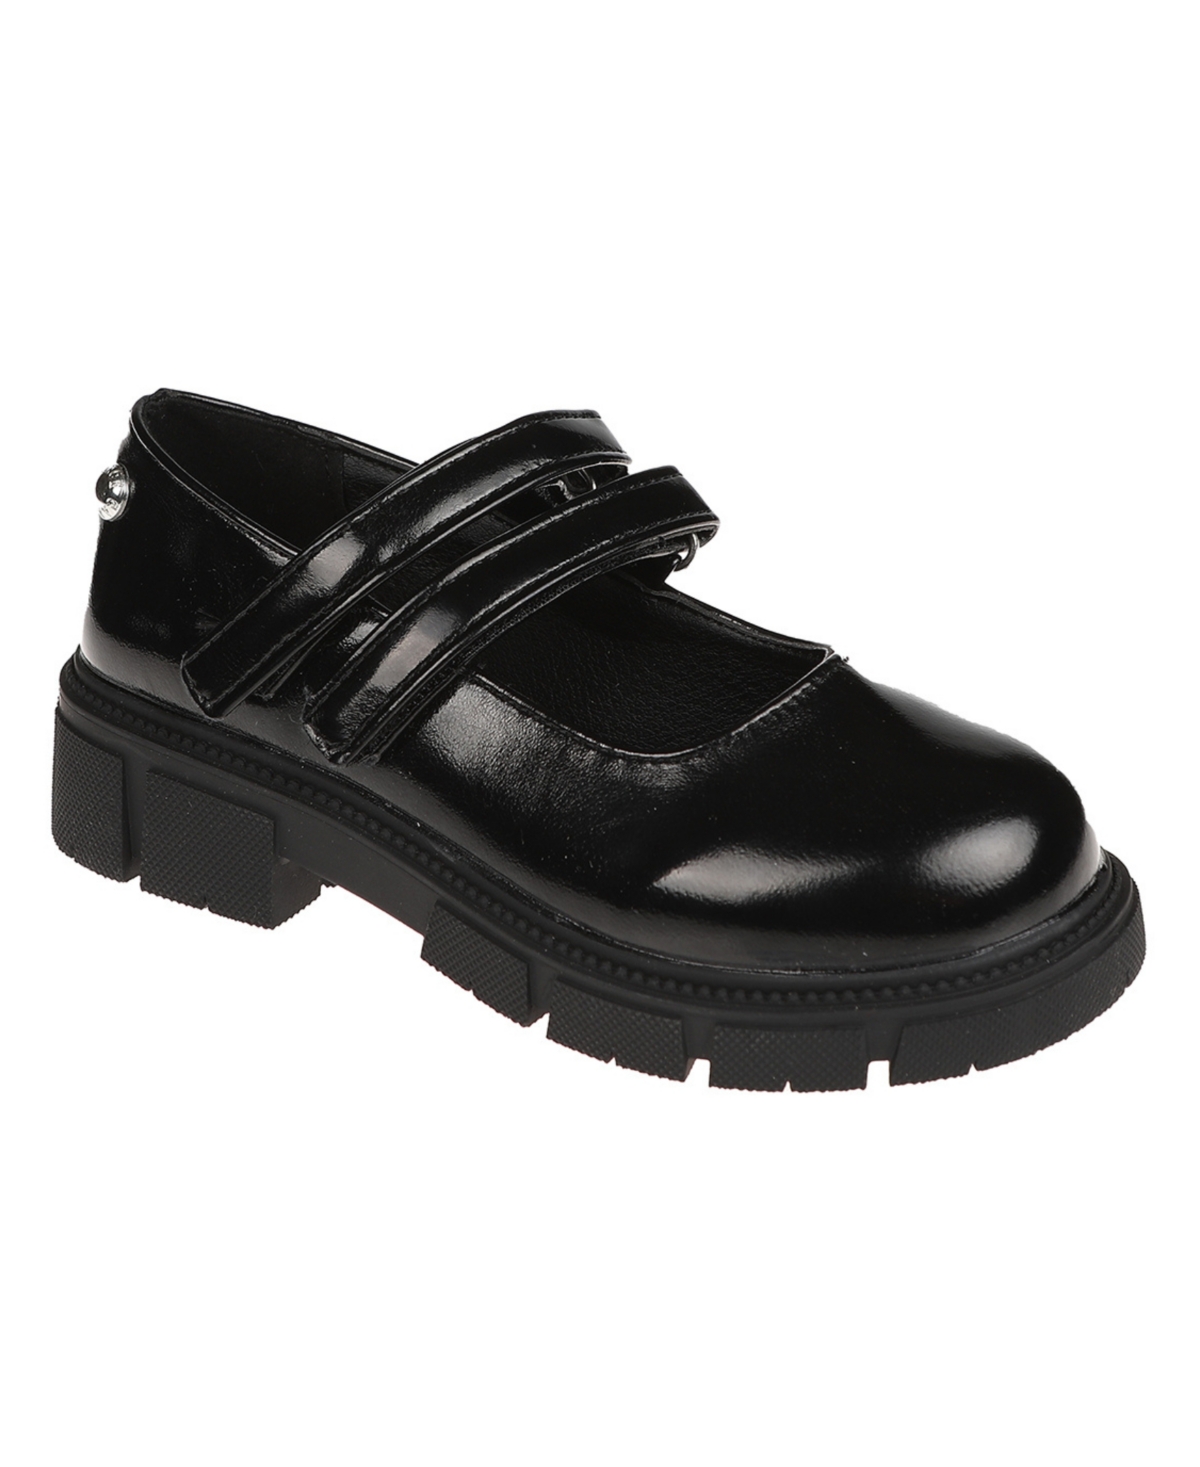 VINCE CAMUTO LITTLE GIRLS MARY JANE LOAFERS PATENT SCHOOL UNIFORM DRESS SHOES